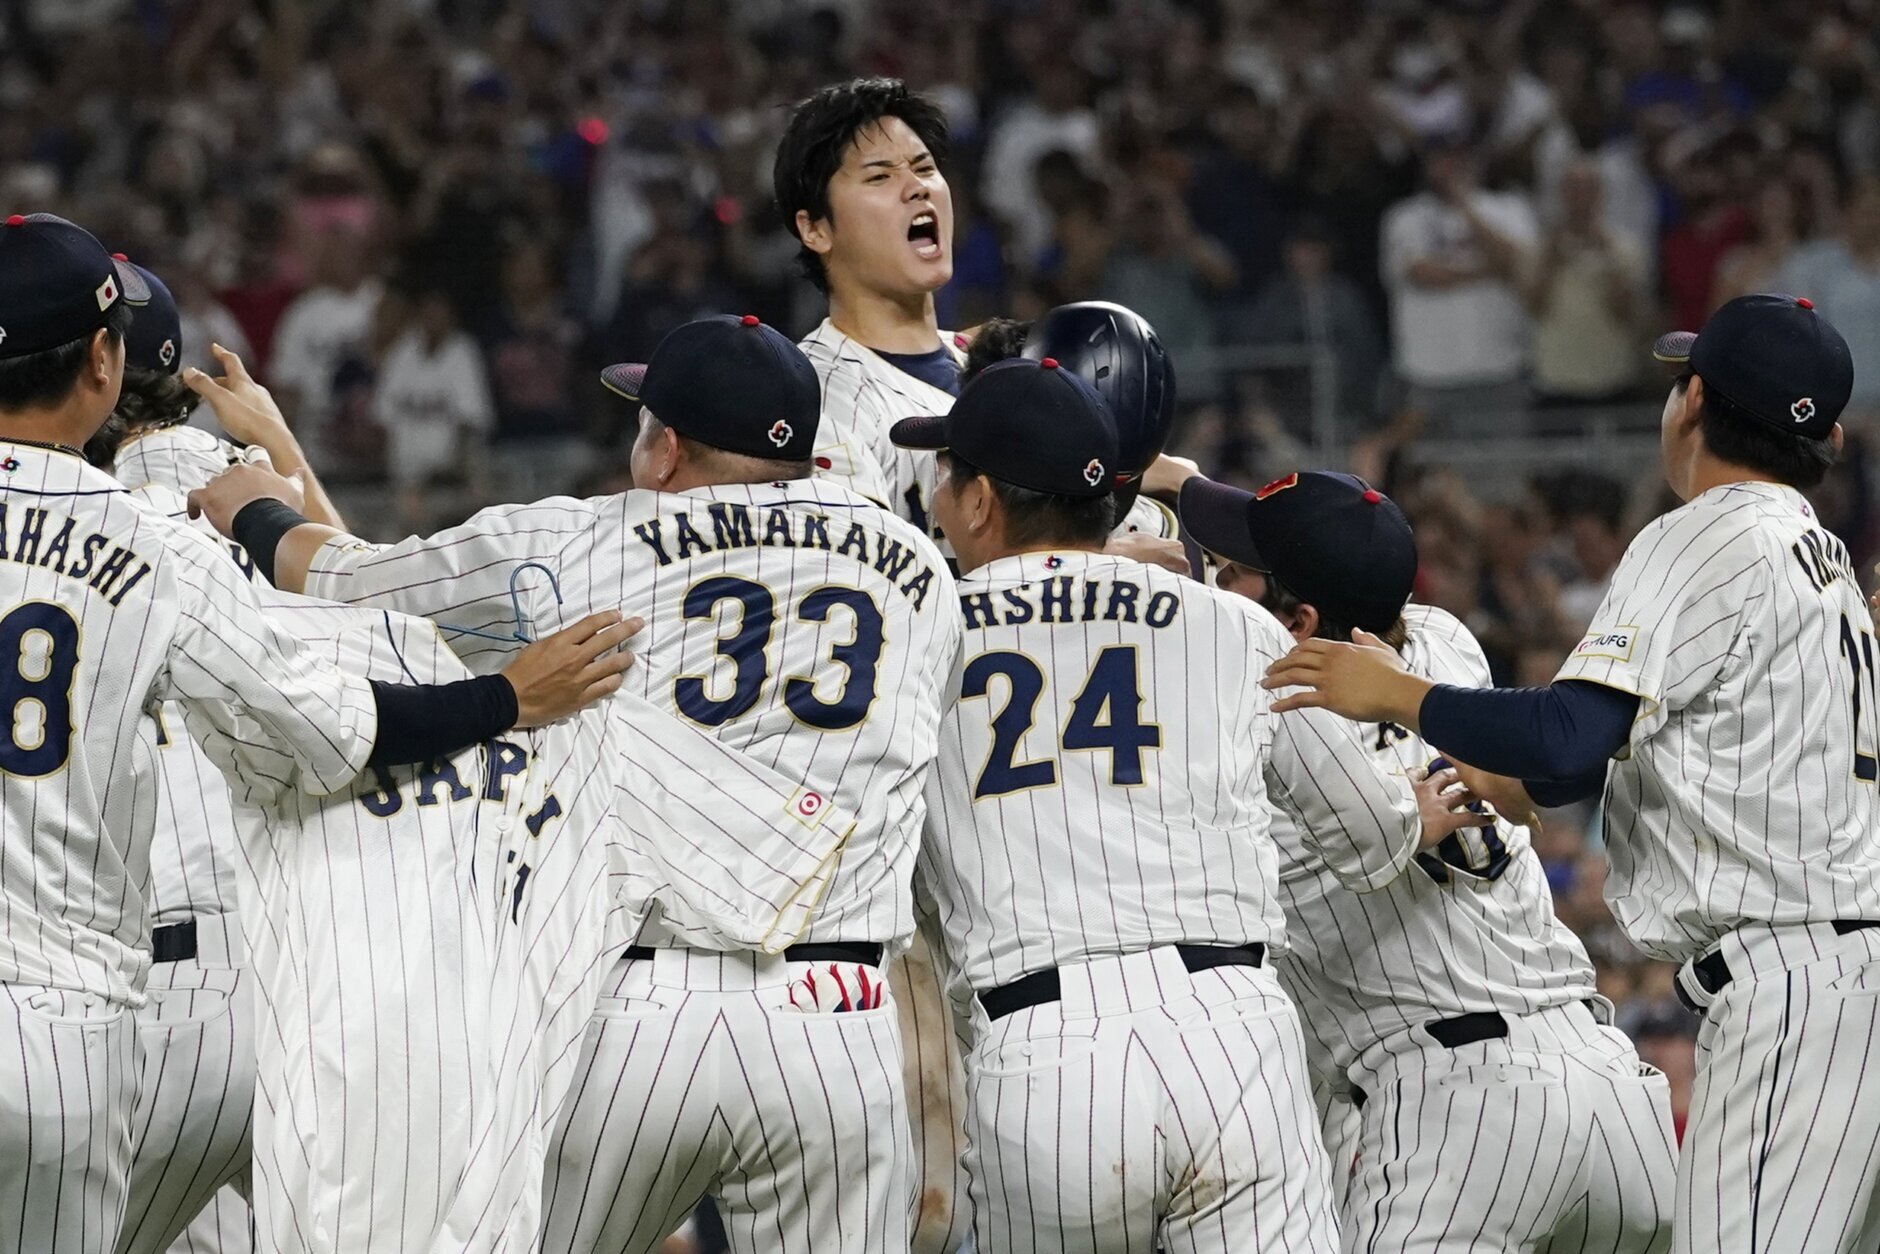 Ohtani leads Japan to WBC win over China with arm, bat